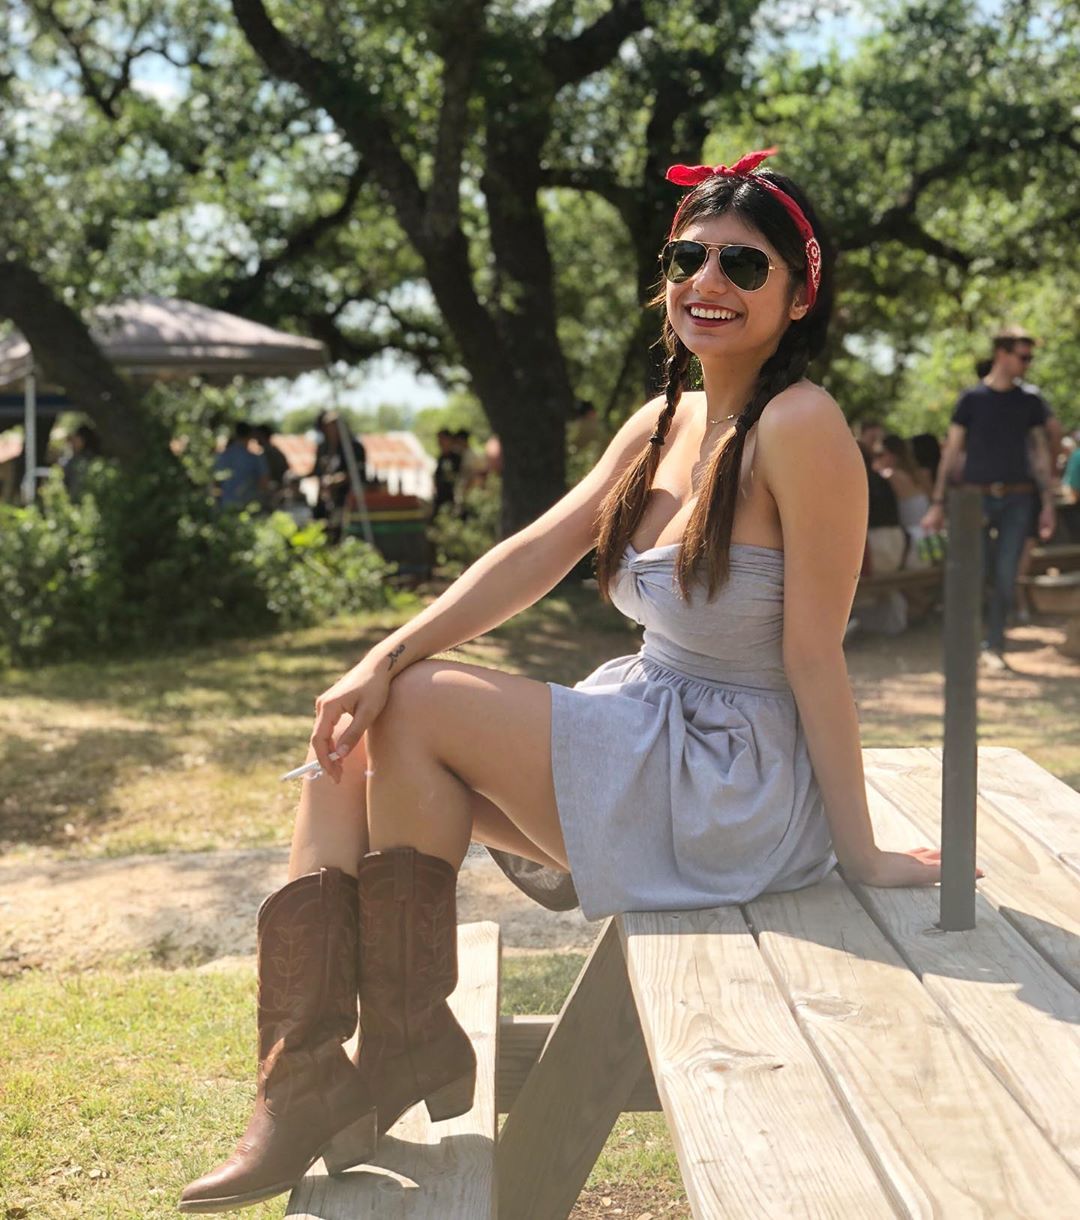 Hot Mia Khalifa sitting in the park wearing sungalsses and enjoying the weather